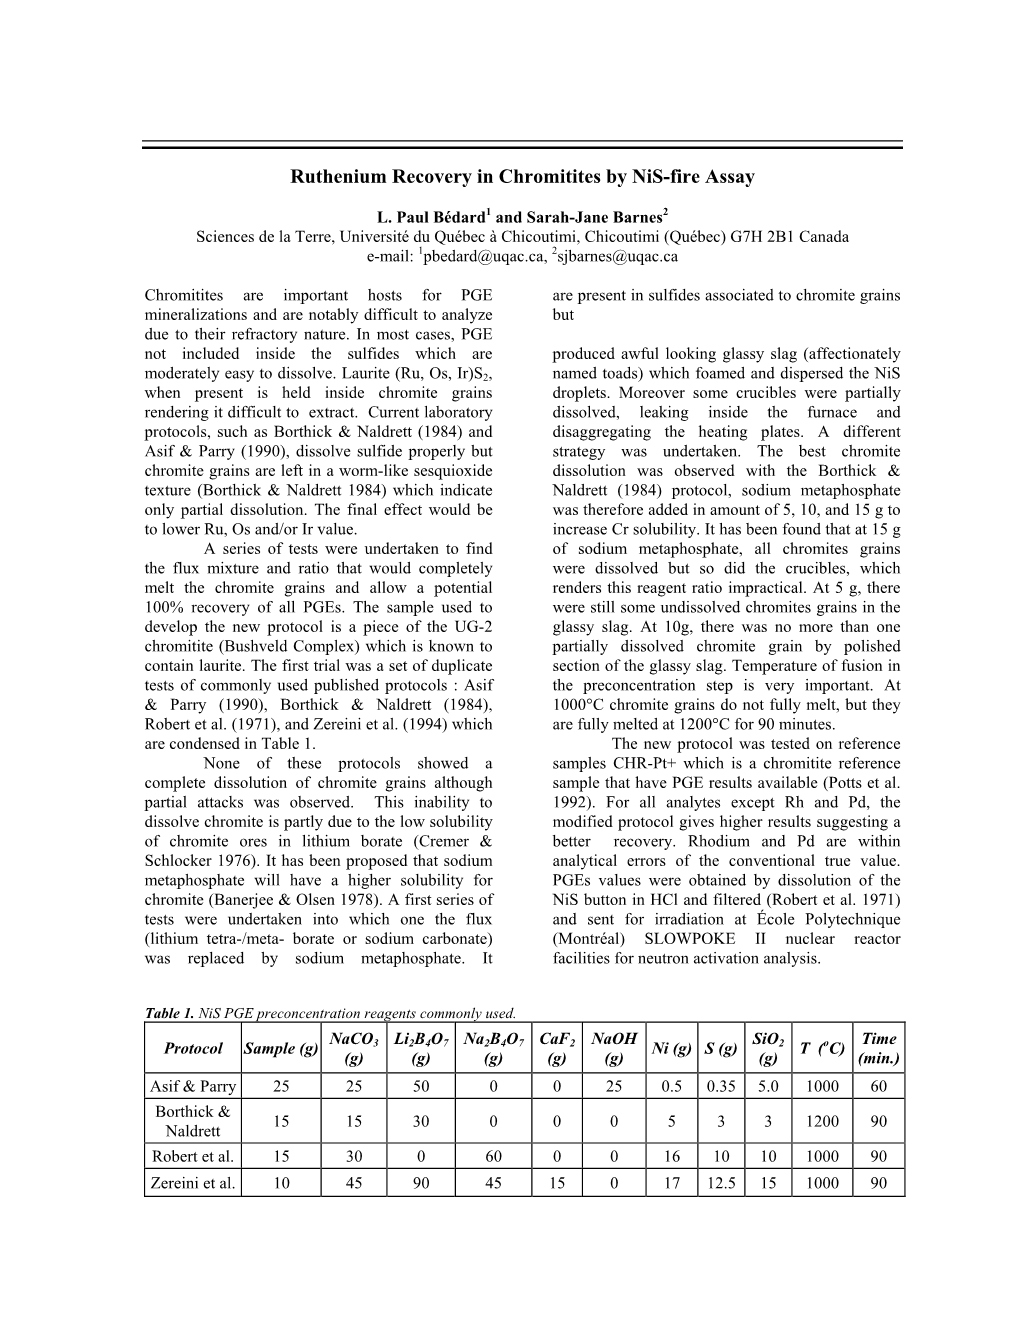 Ruthenium Recovery in Chromitites by Nis-Fire Assay